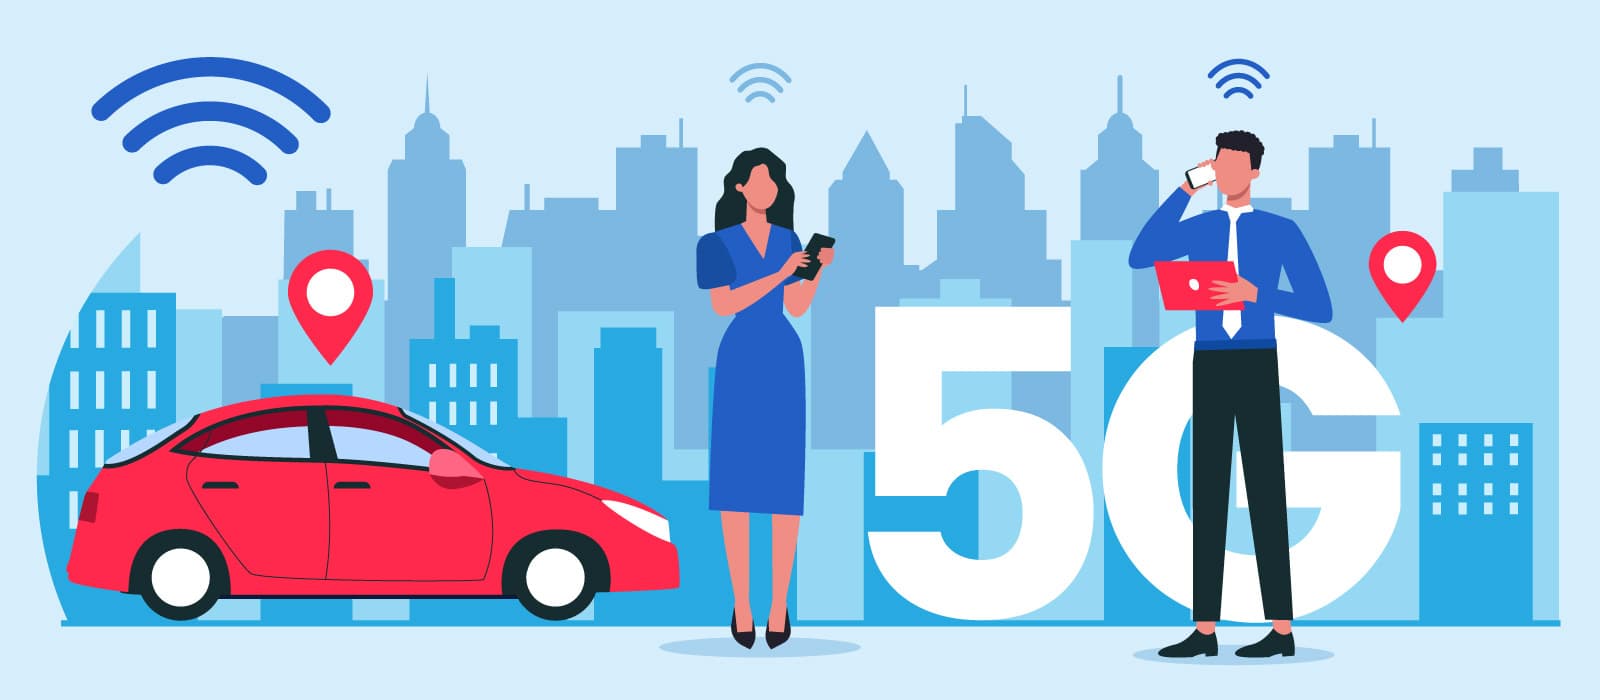 Two people communicating via phone next to a car, 5G icon, and wireless network icons